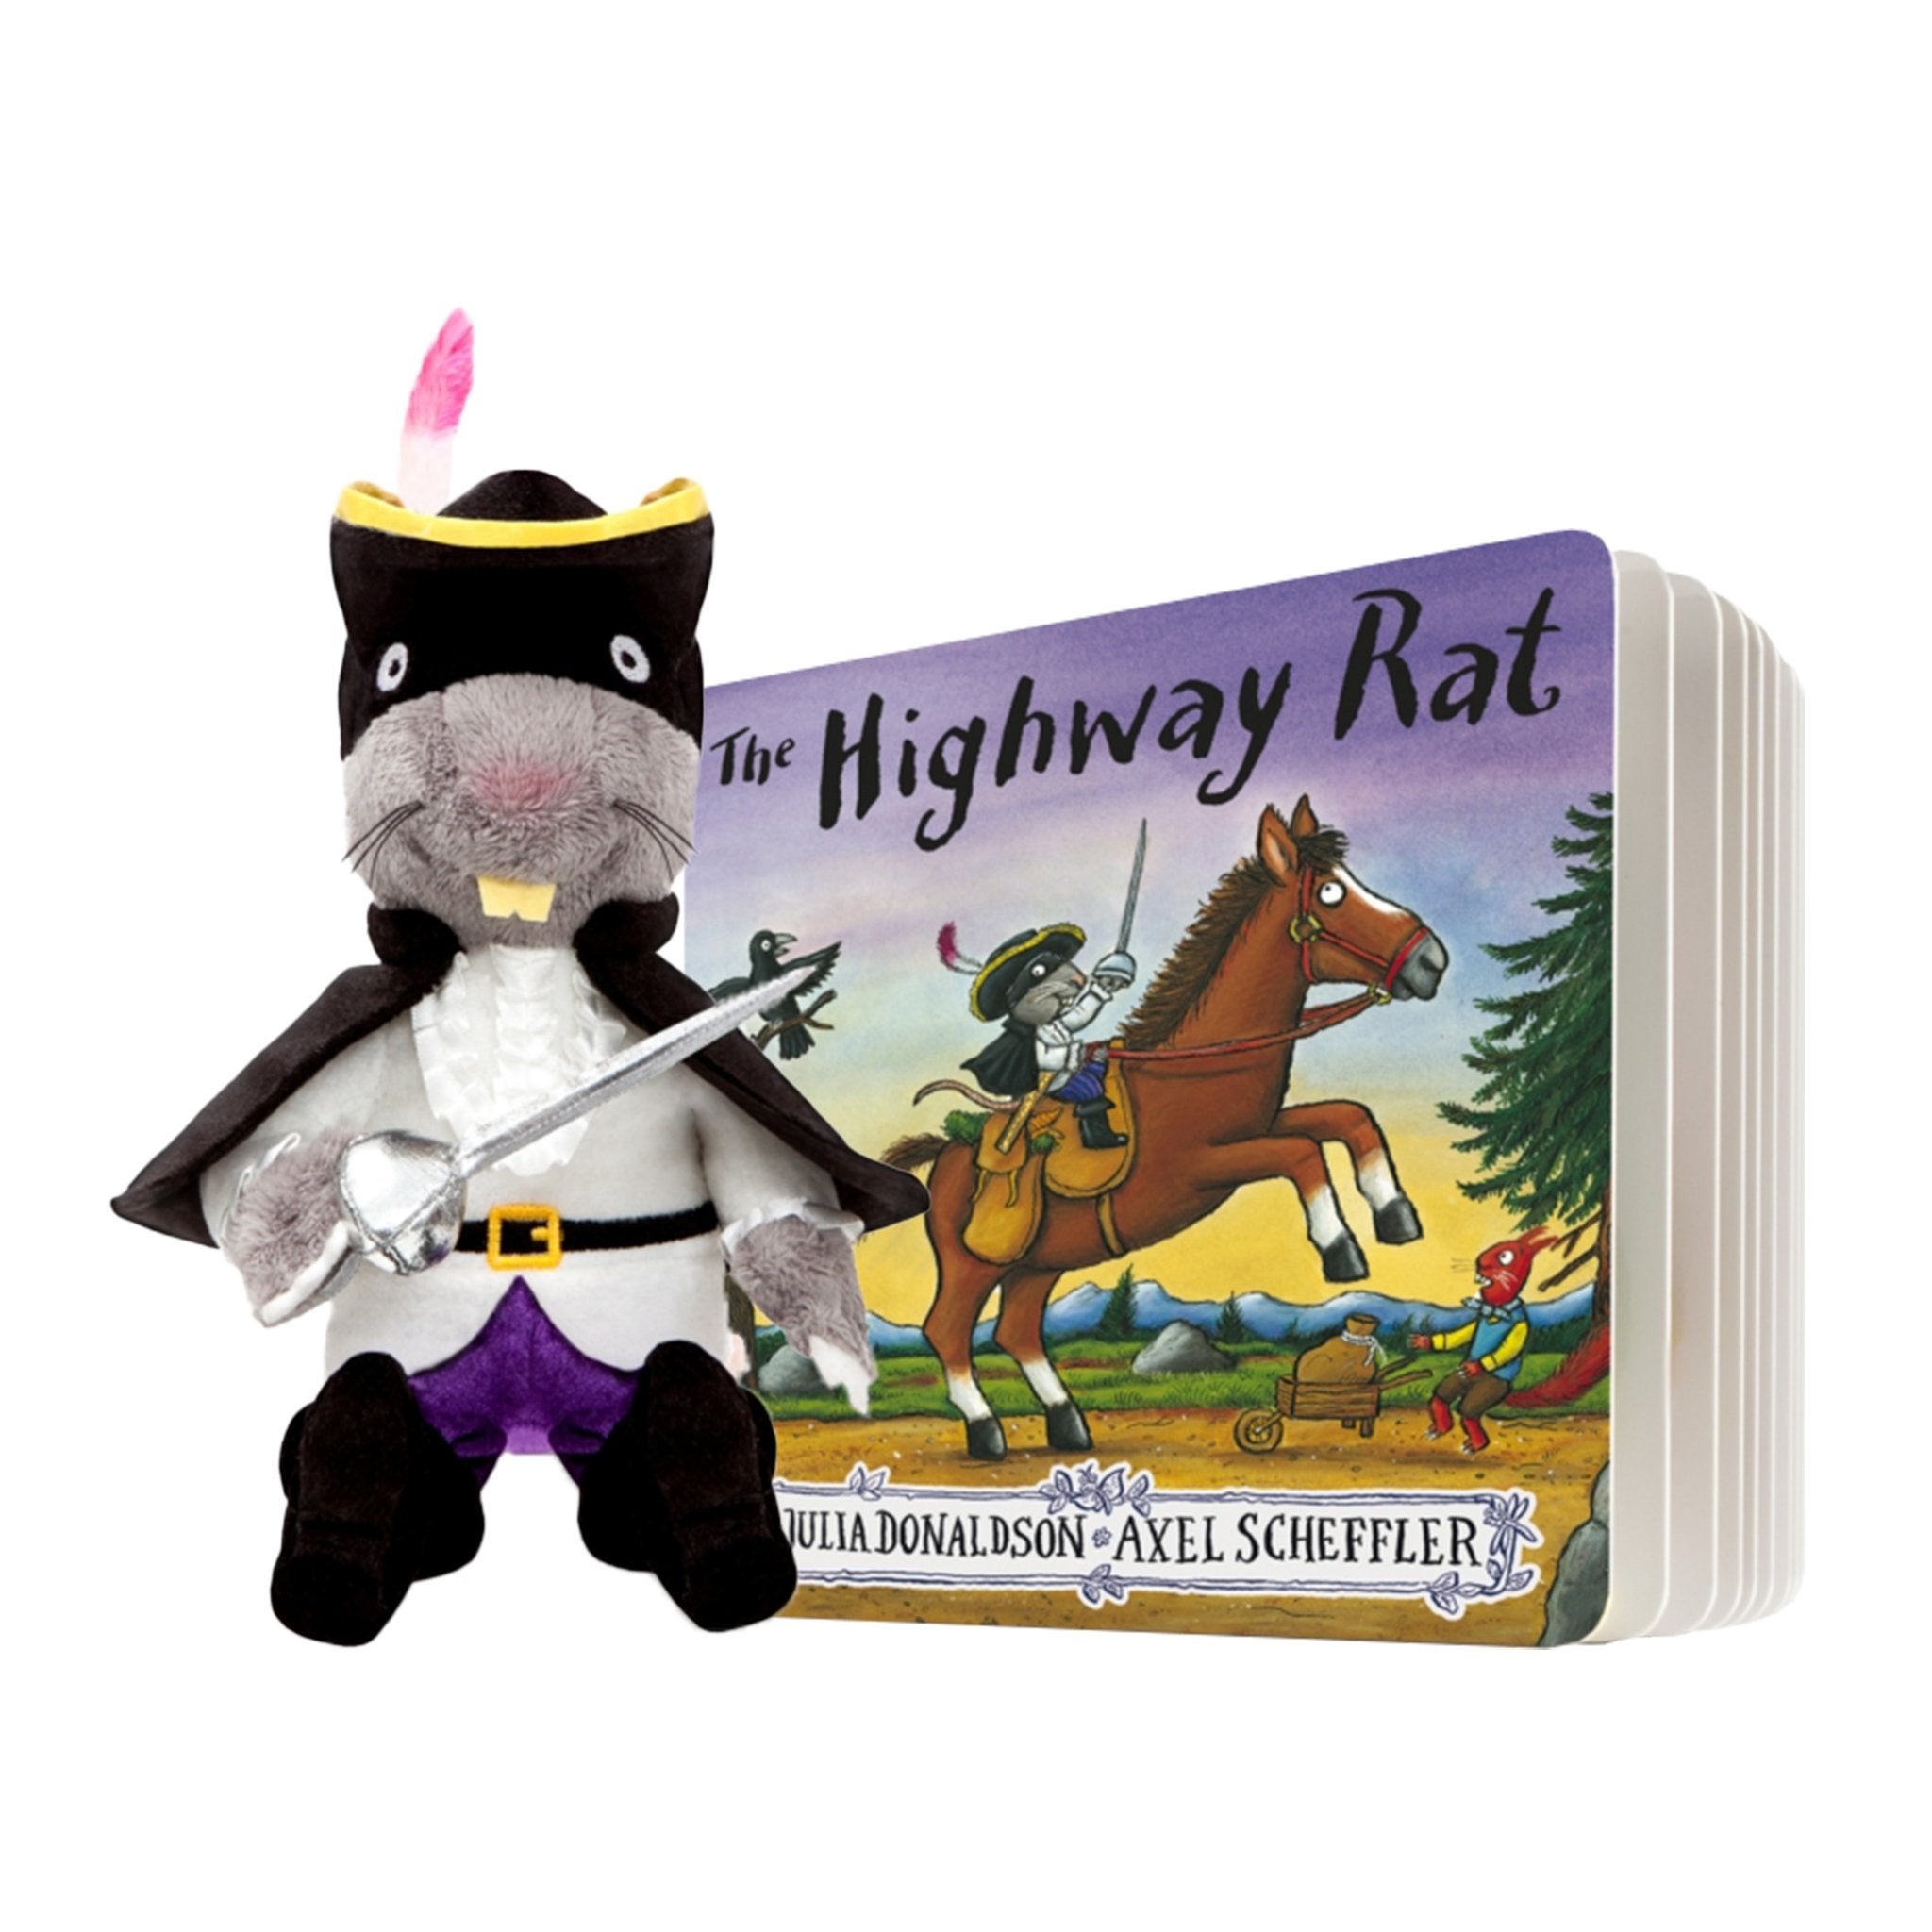 Highway Rat Book and Toy Gift Set